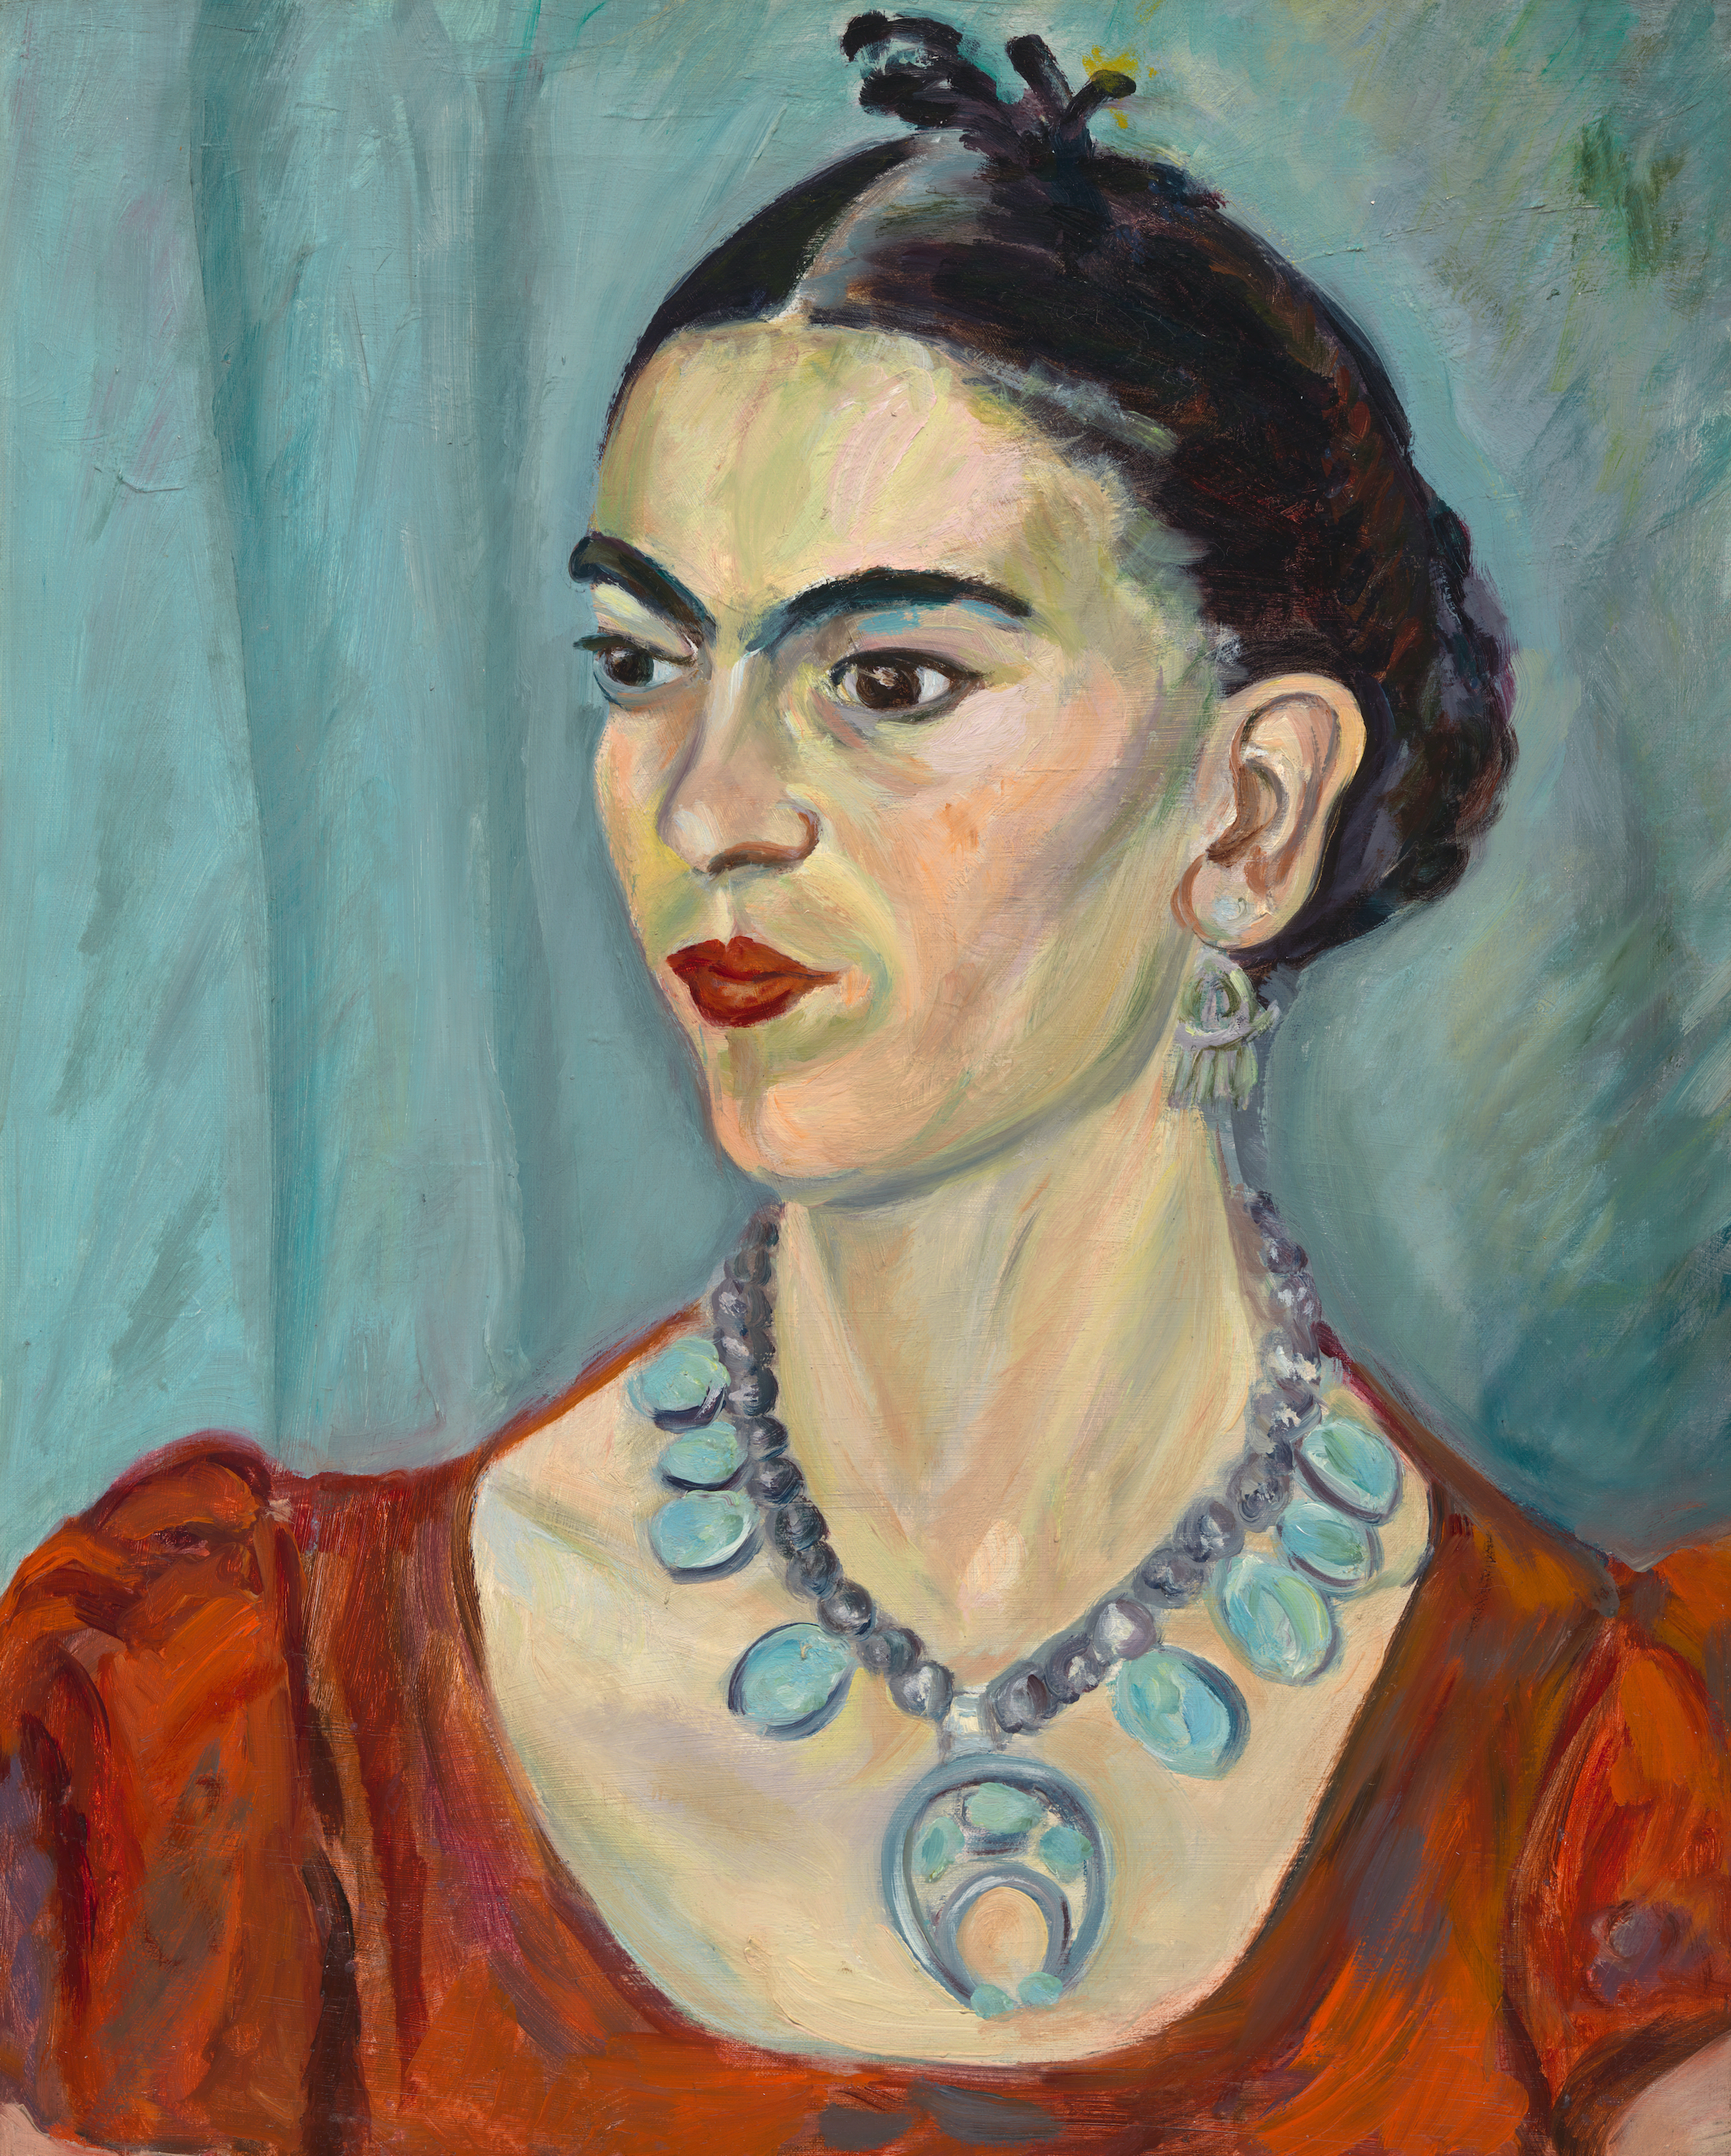 Frida Kahlo by Magda Pach - 1933 - 51.1 × 41 cm Smithsonian American Art Museum